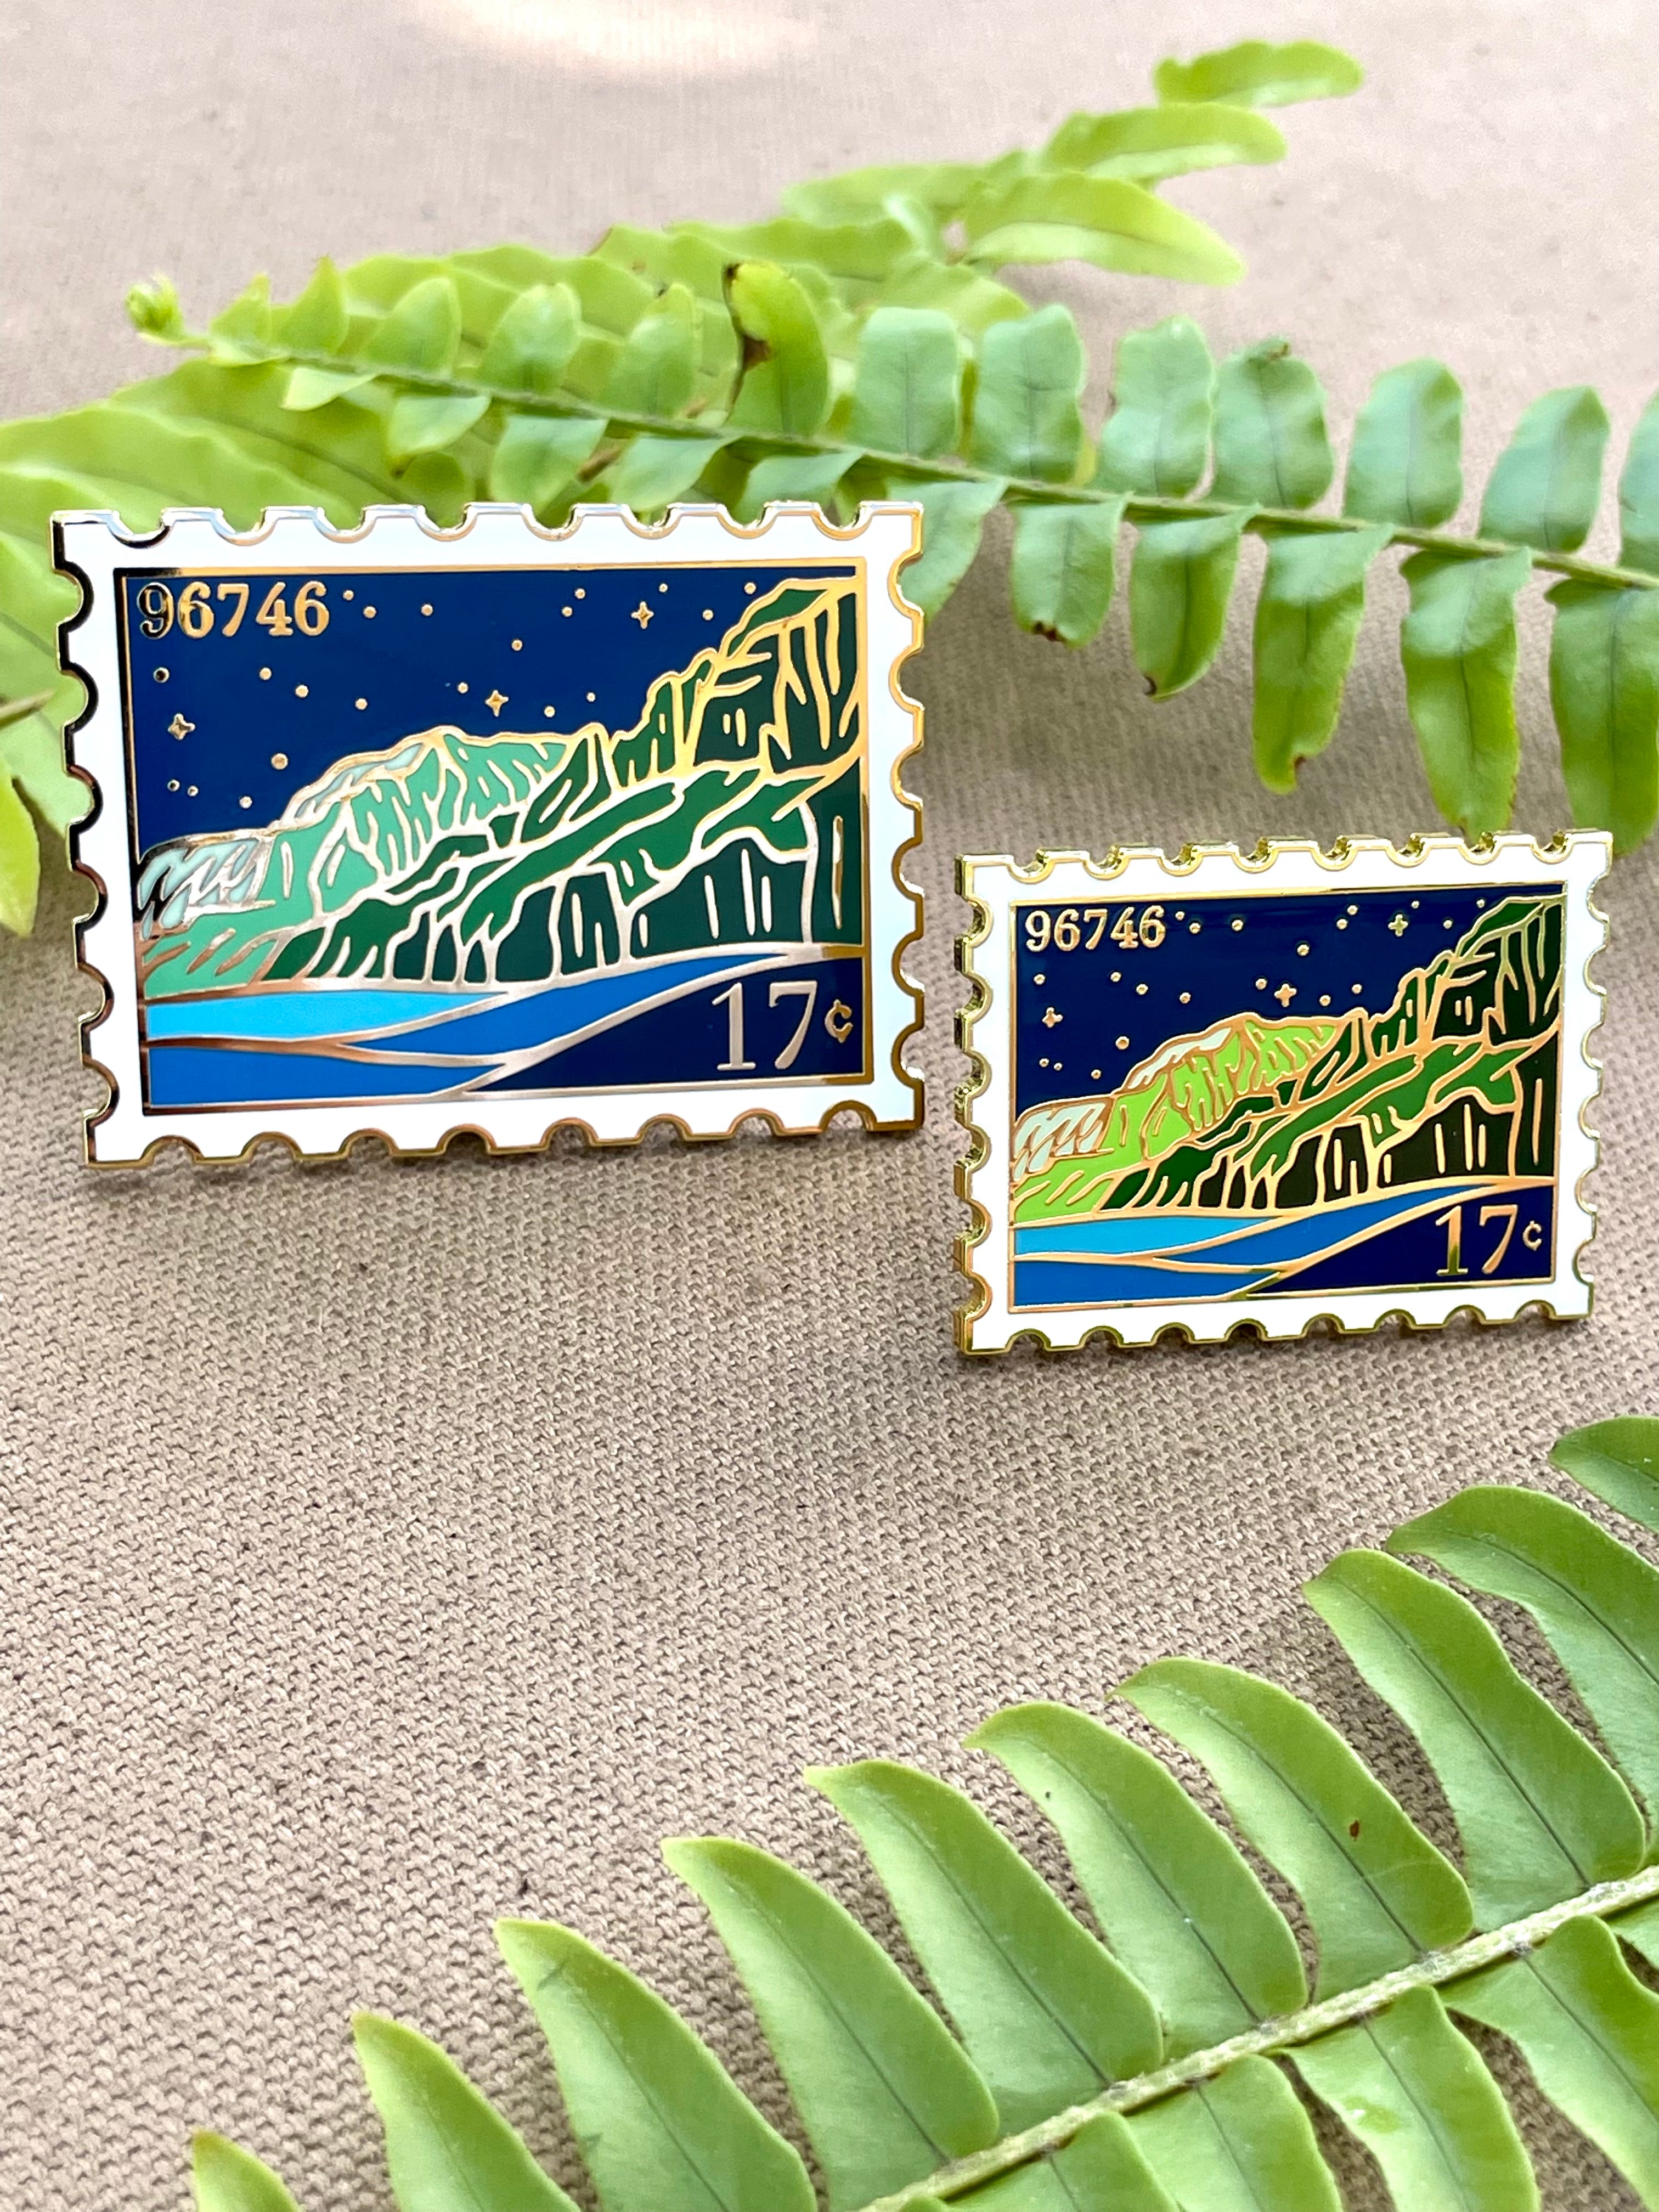 SECONDS ✷ Nā Pali Post Stamp Pin ~ Limited Edition